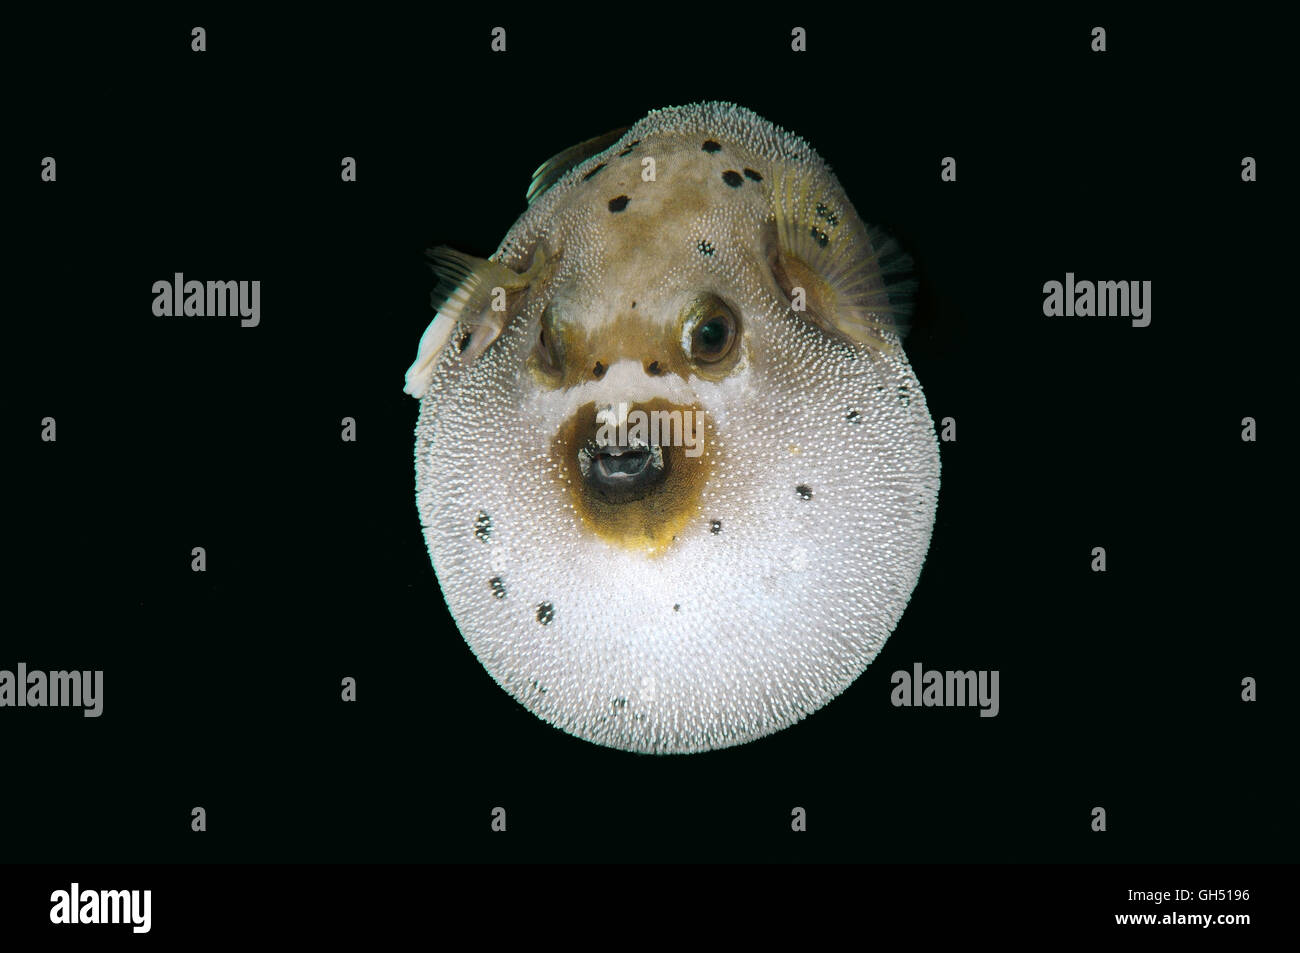 Blackspotted puffer or dog-faced puffer (Arothron nigropunctatus) Indo-Pacific, Philippines, Southeast Asia Stock Photo